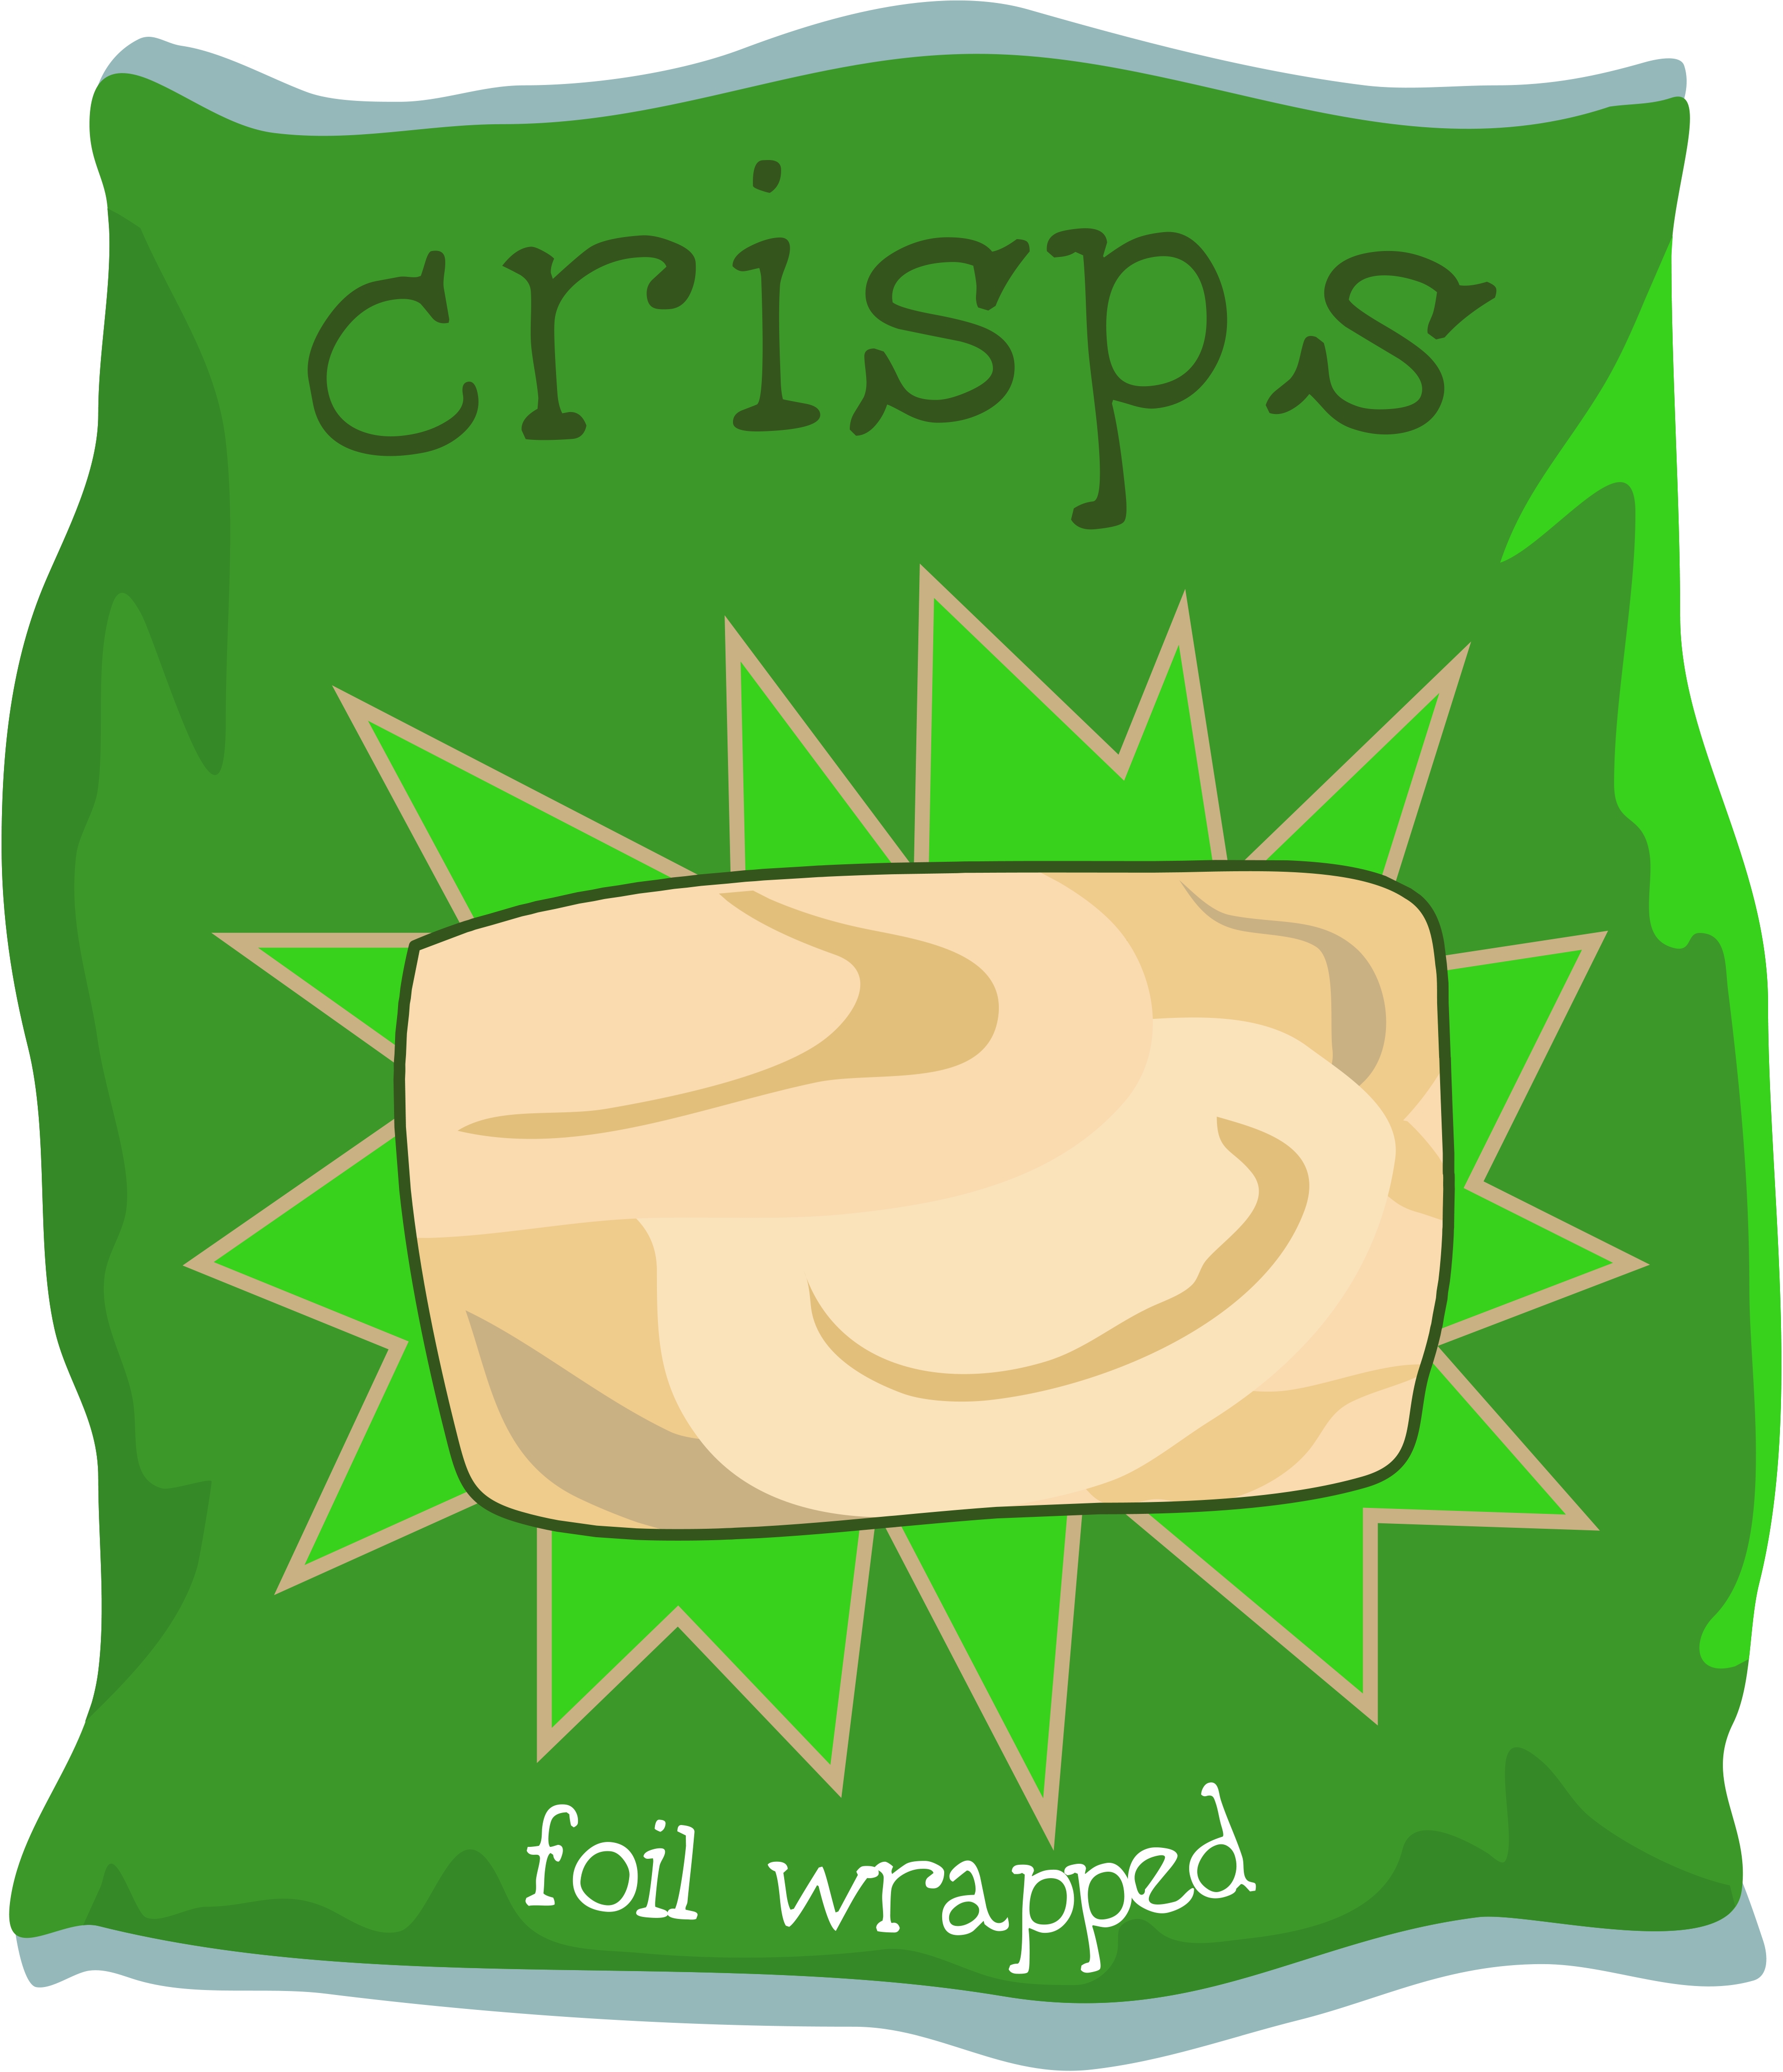 bag of chips clipart - photo #36